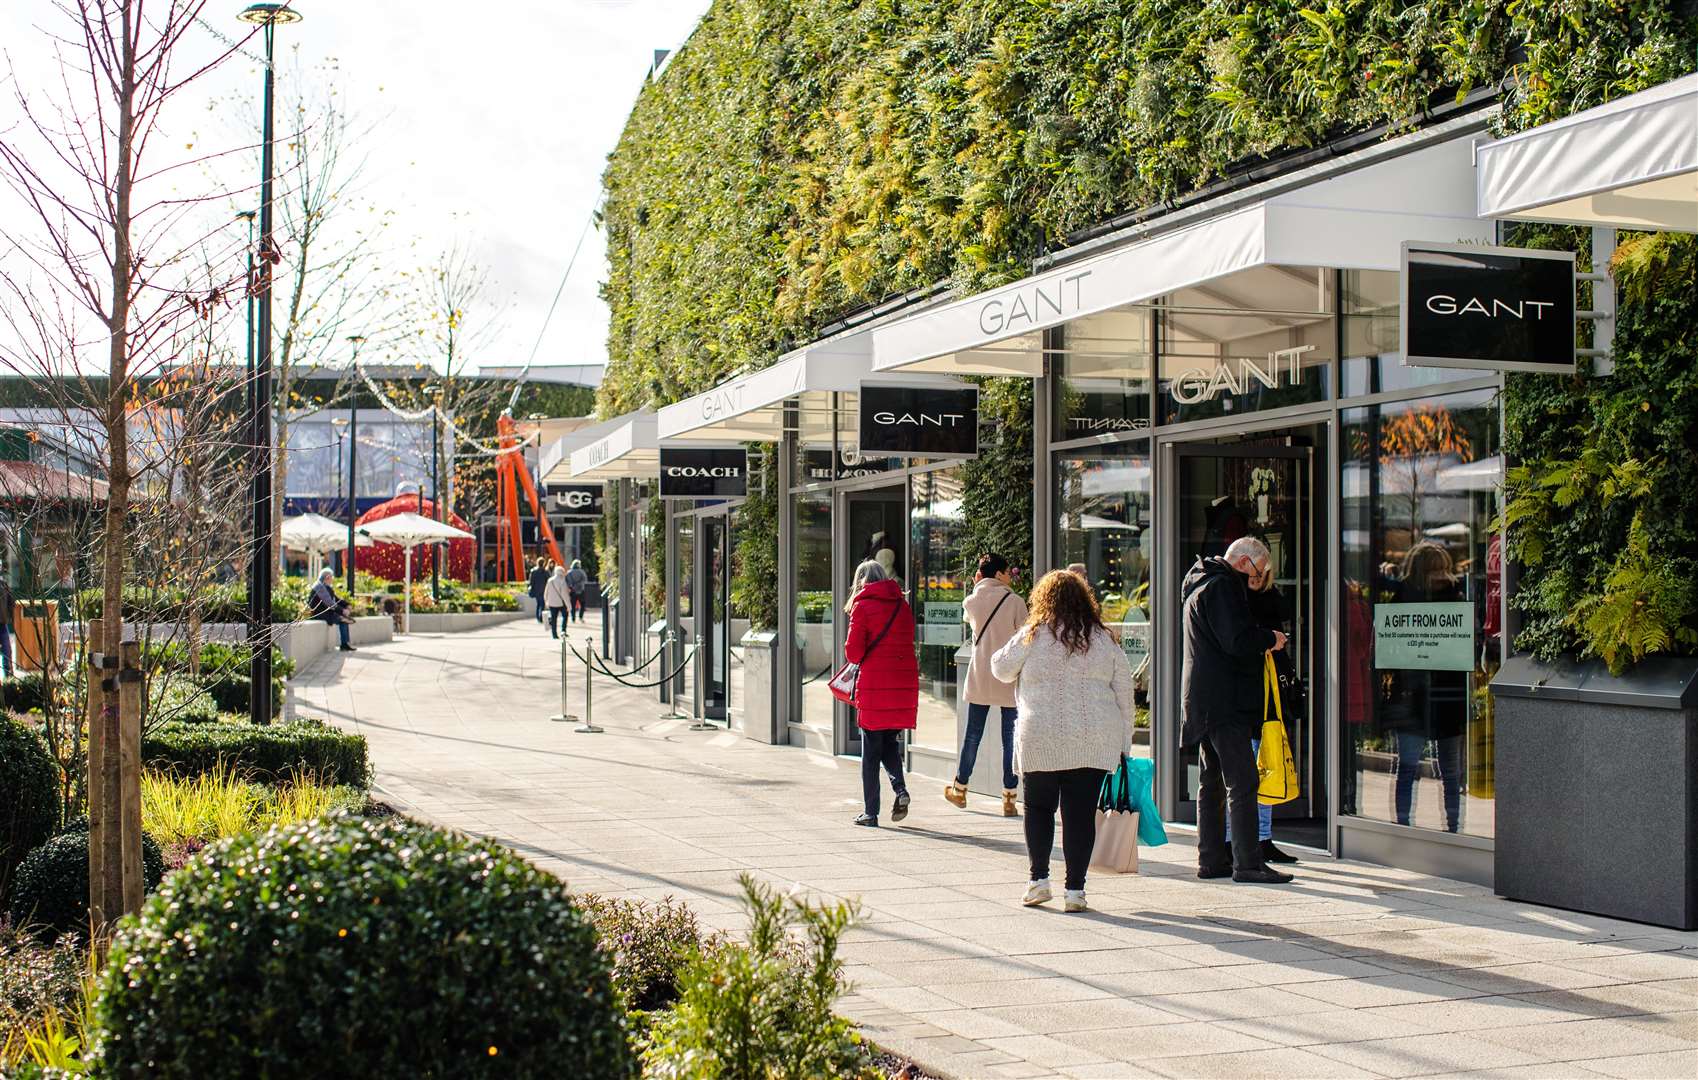 The Designer Outlet extension opened last year, adding new shops to the site and a 'living wall'